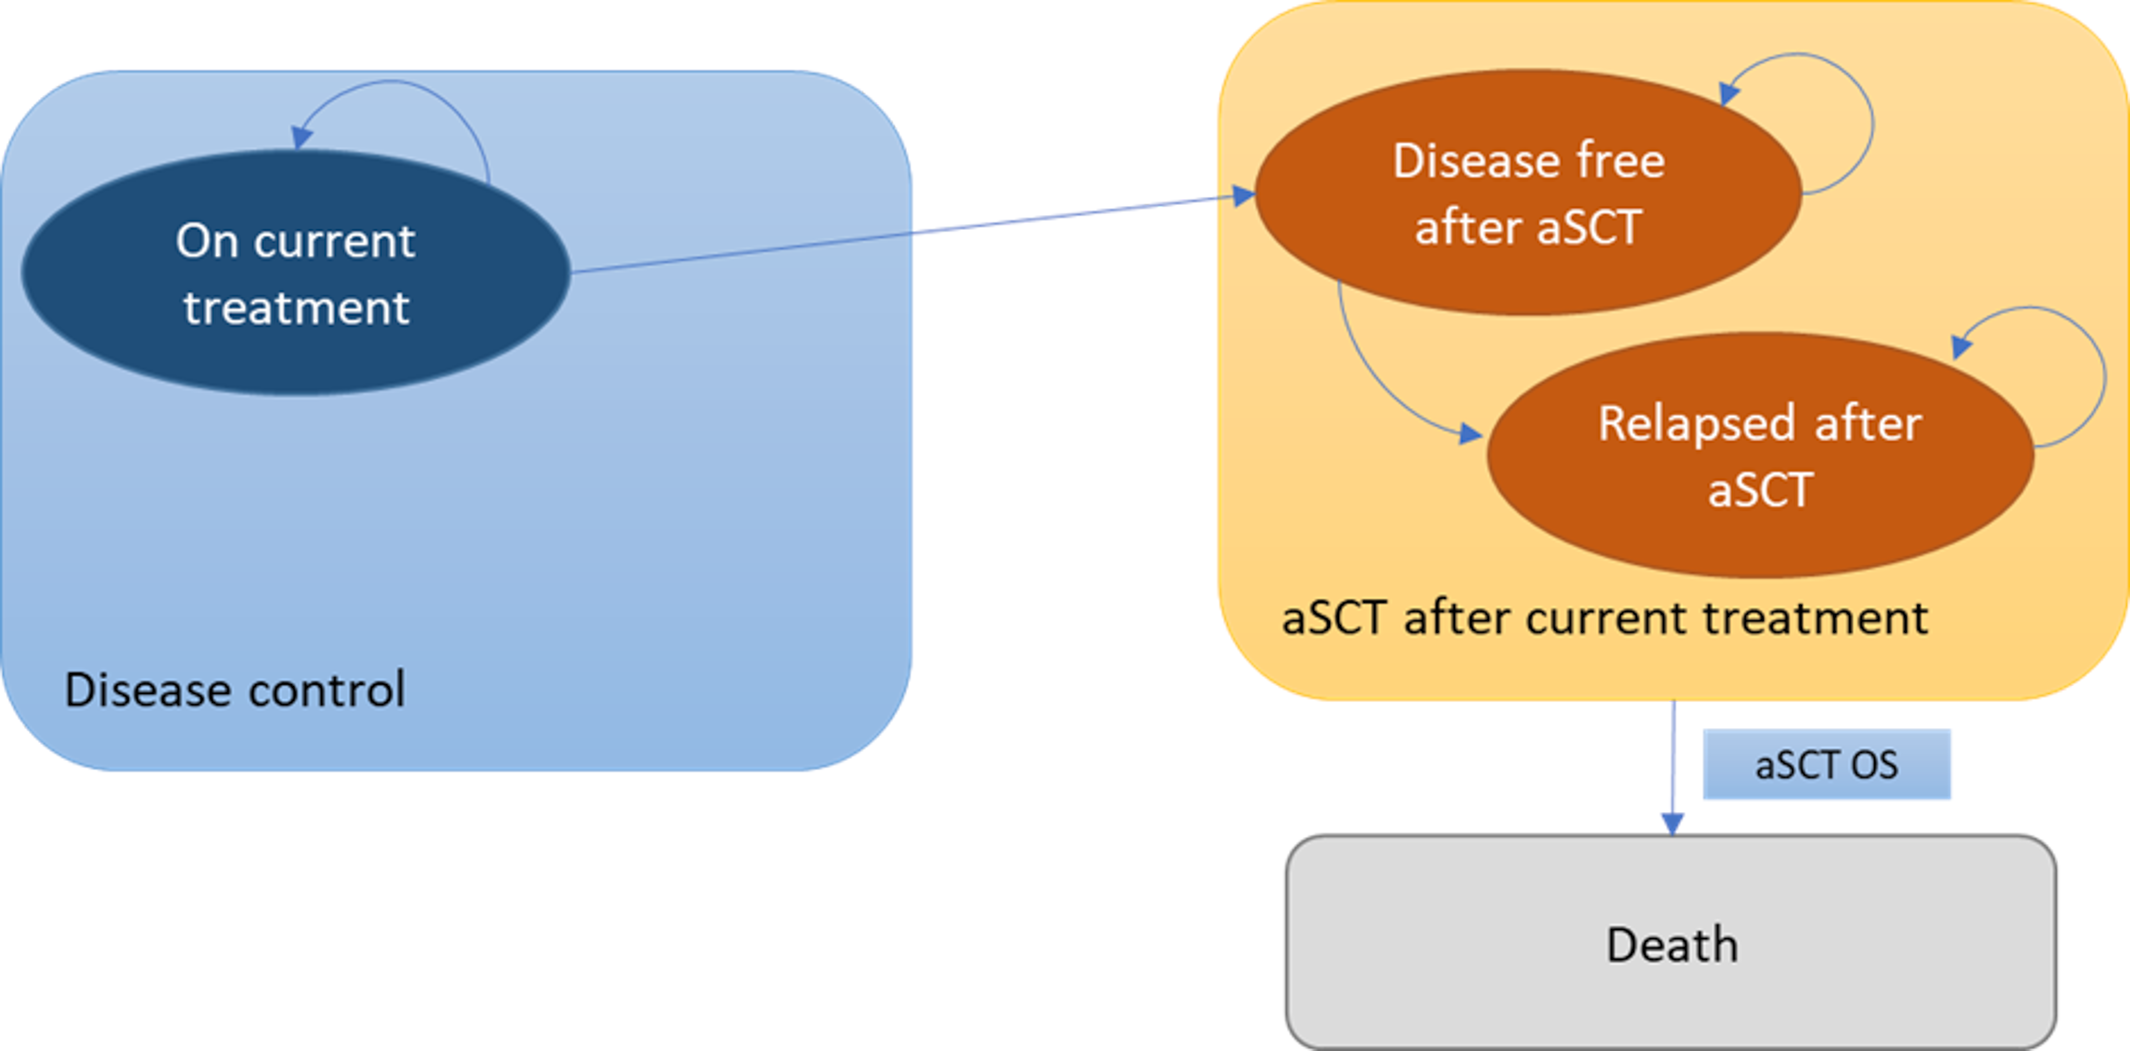 A diagram of the model structure. One health state exists within a box labelled “Disease Control” — this state is labelled “On current treatment.” Two health states exist within a box labelled “aSCT after current treatment” — these states are labelled “Disease free after aSCT” and “Relapsed after aSCT.” Patients may move from the “On current treatment” state to the “Disease free after aSCT” state. They may experience death from the “aSCT after current treatment” box — this transition is labelled “aSCT Overall Survival” or aSCT OS.